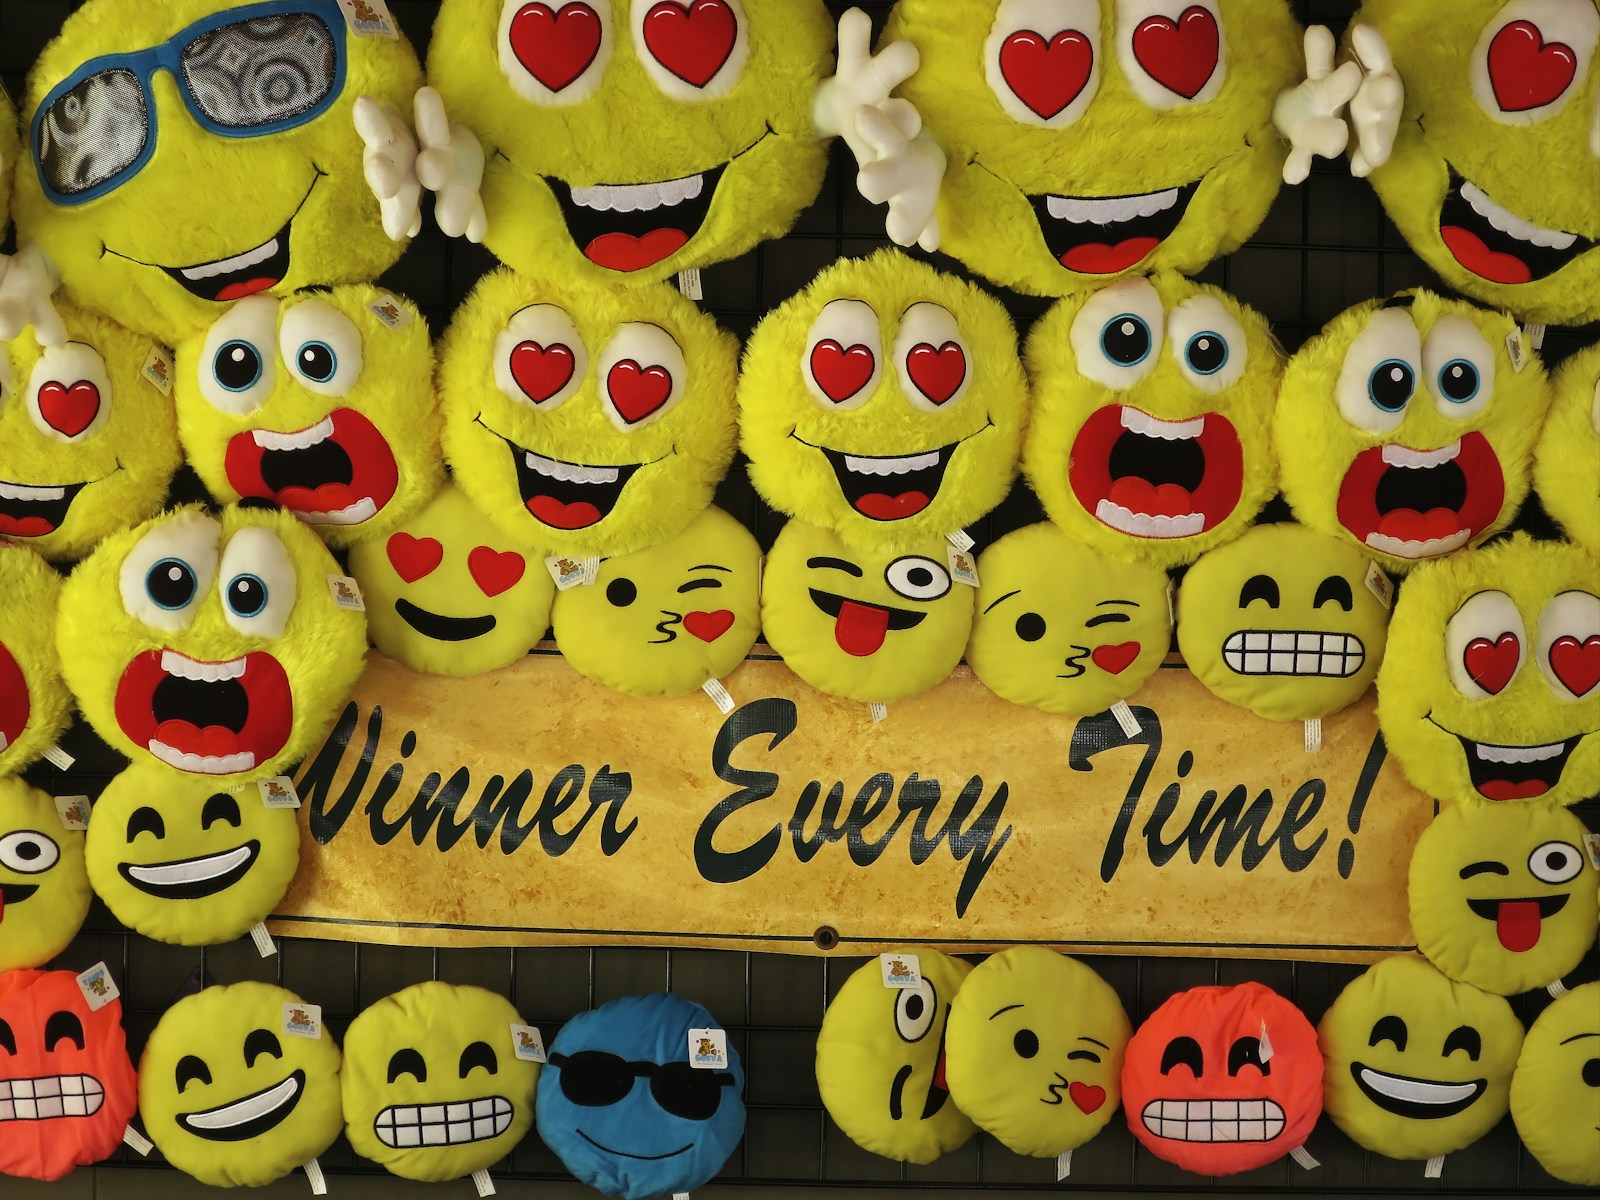 a group of yellow smiley faces with winner every time slogan